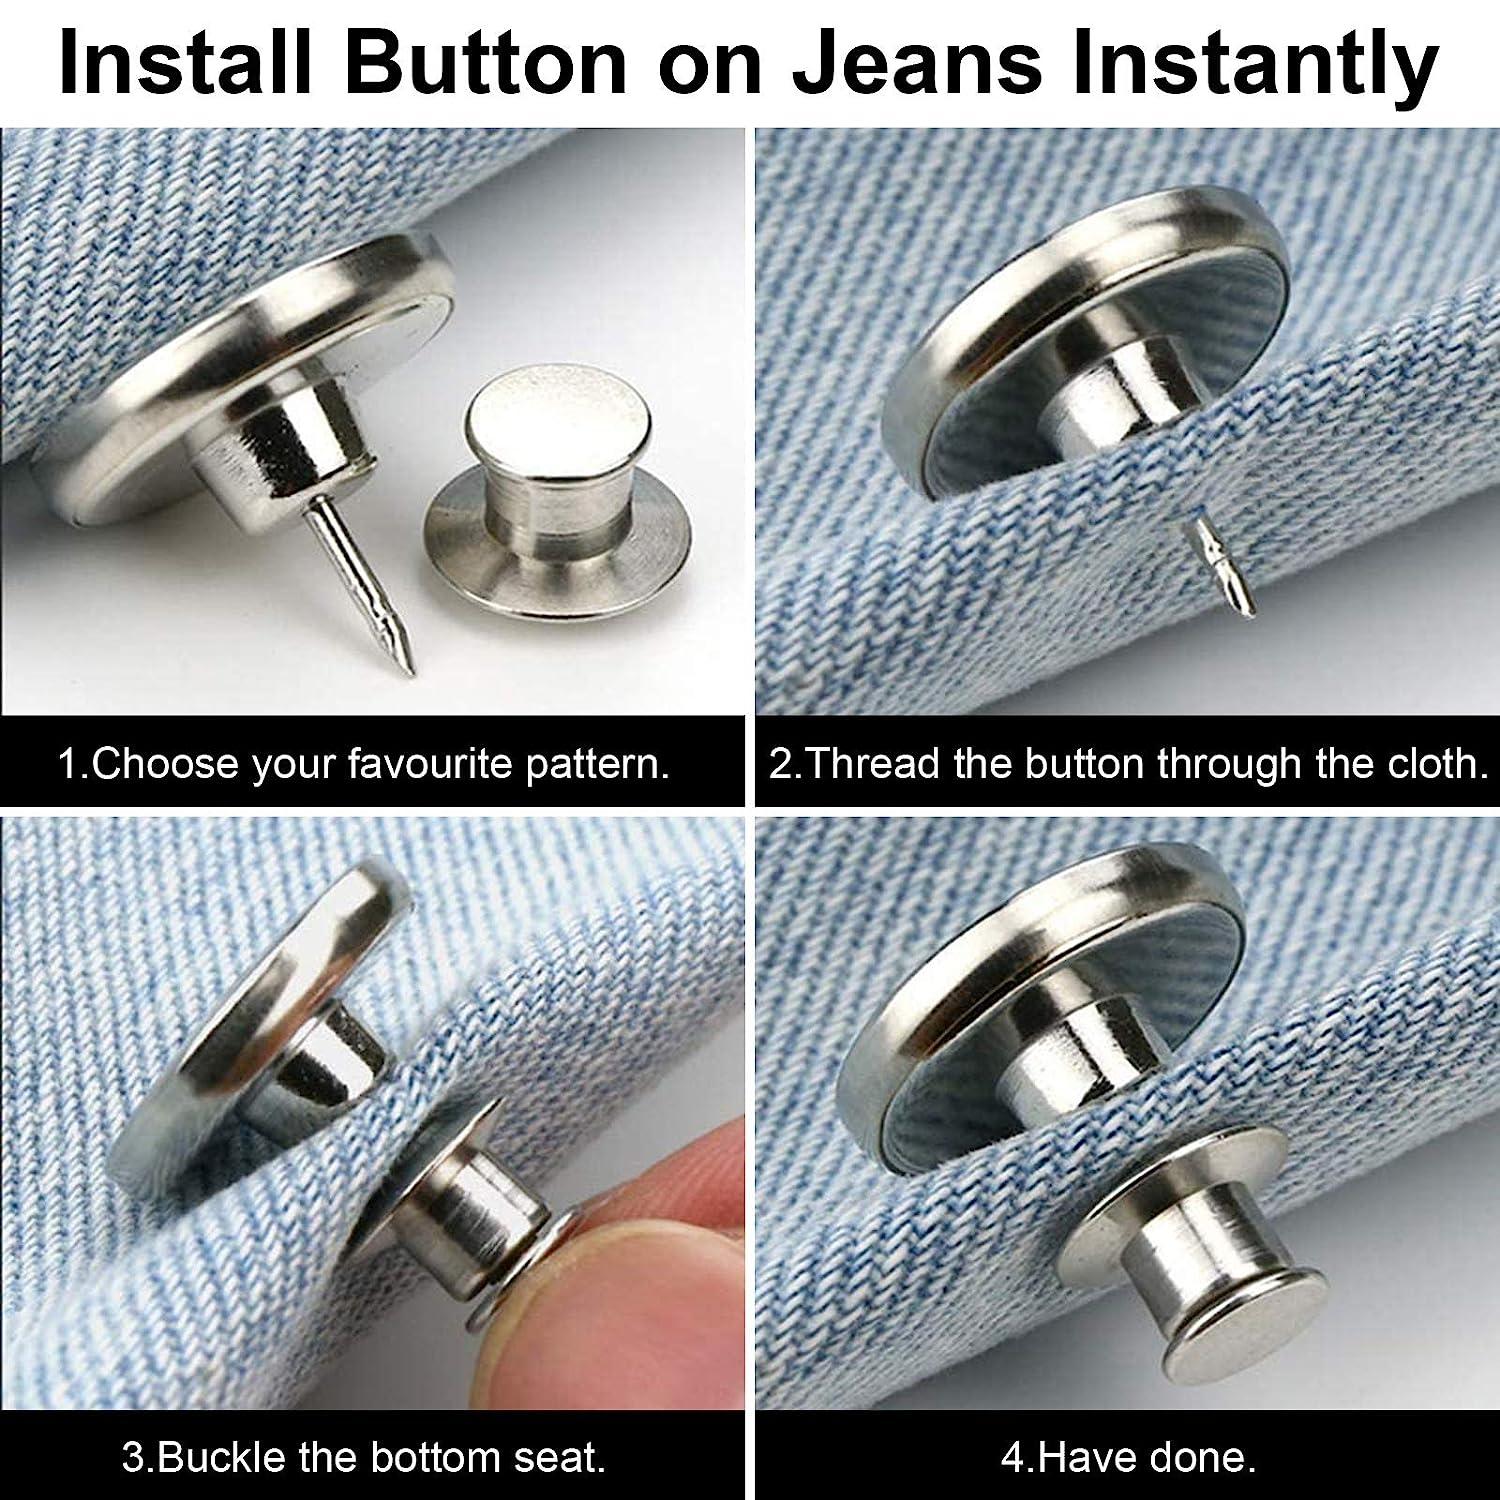  [Upgraded] 8 Sets Jean Buttons Replacement No Sew  Needed,TOOVREN Jean Button Pins,Perfect Fit Instant Button Jean,Button  Clips,Removable Adjustable Jean Button,Metal Button Adds Pants Waist in  Seconds : Arts, Crafts & Sewing